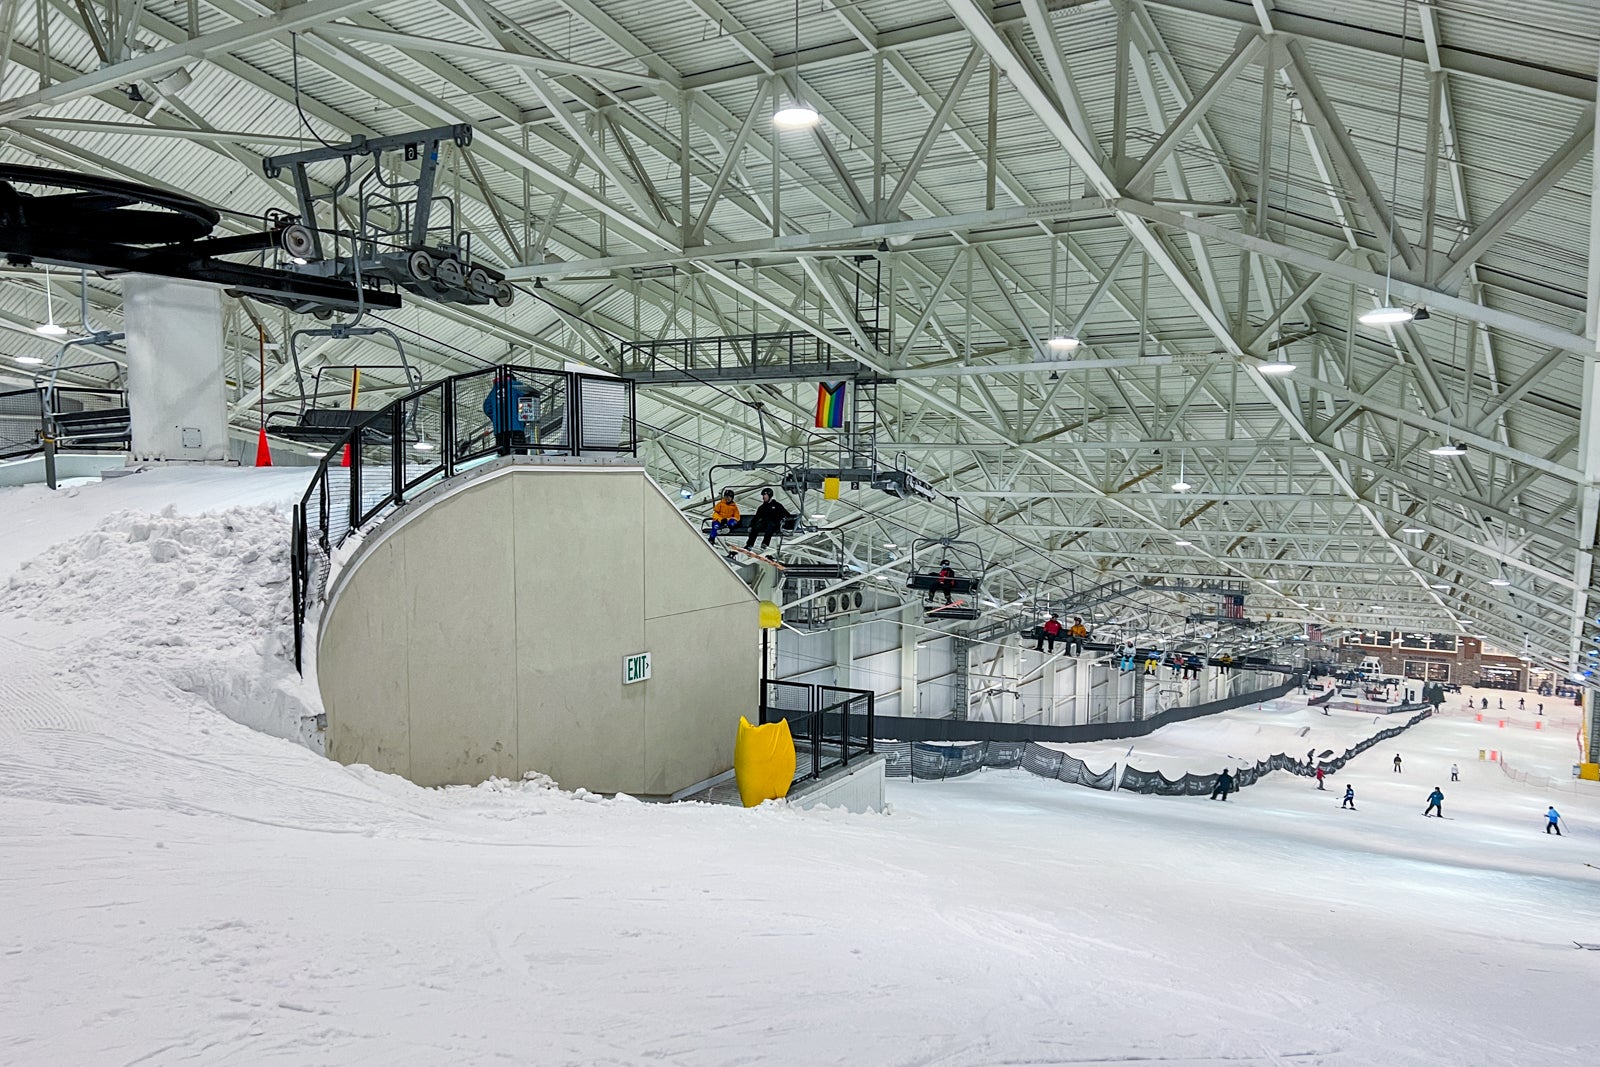 Big Snow American Dream on indoor slope in New Jersey awaits re